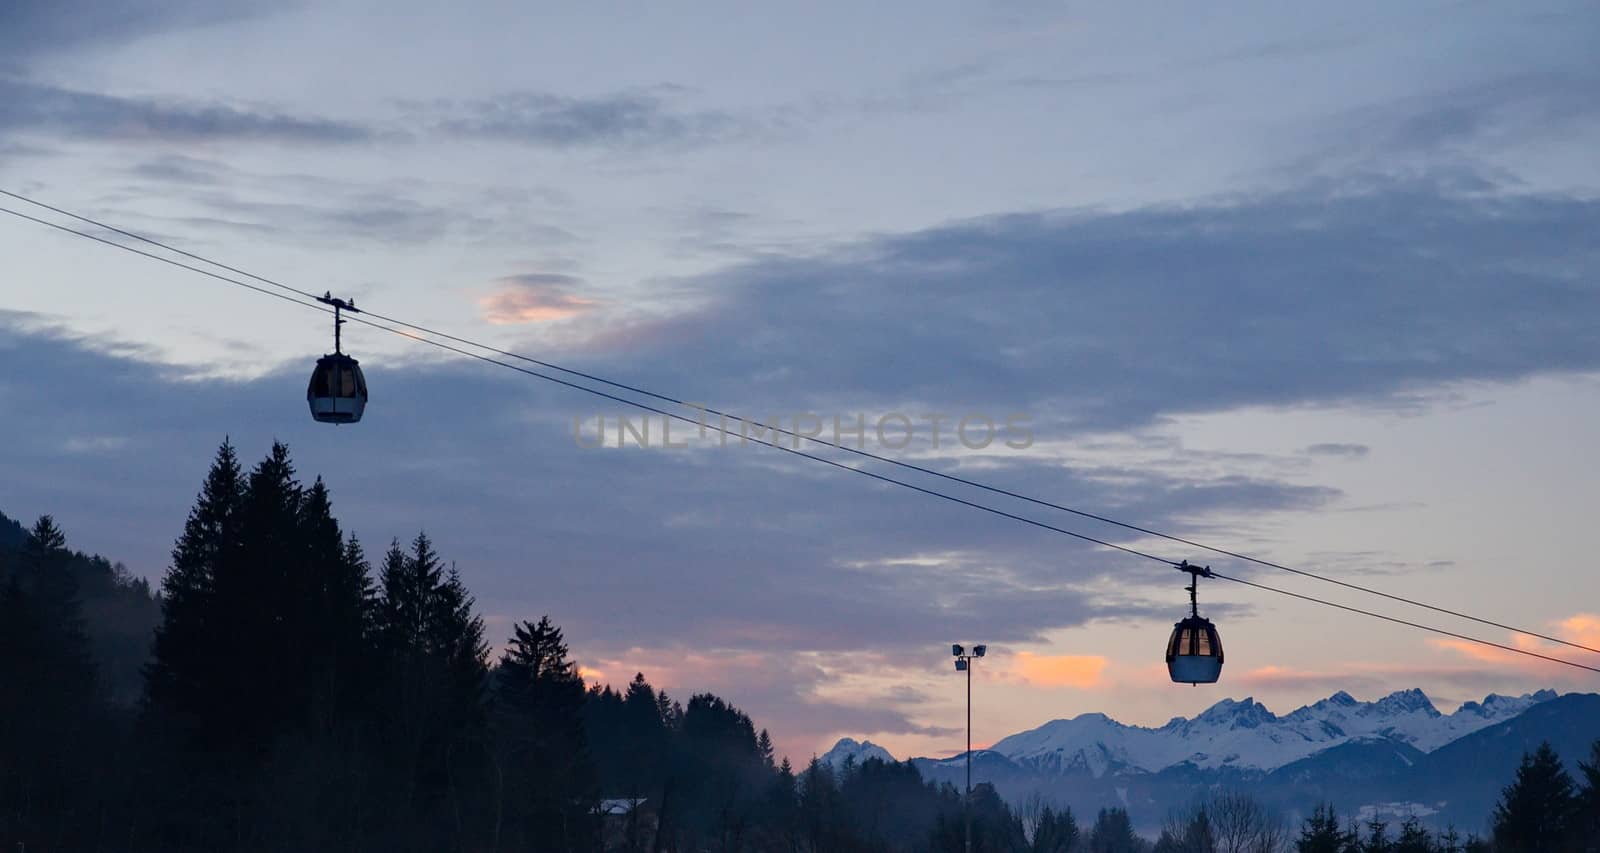 Ski lift by anderm